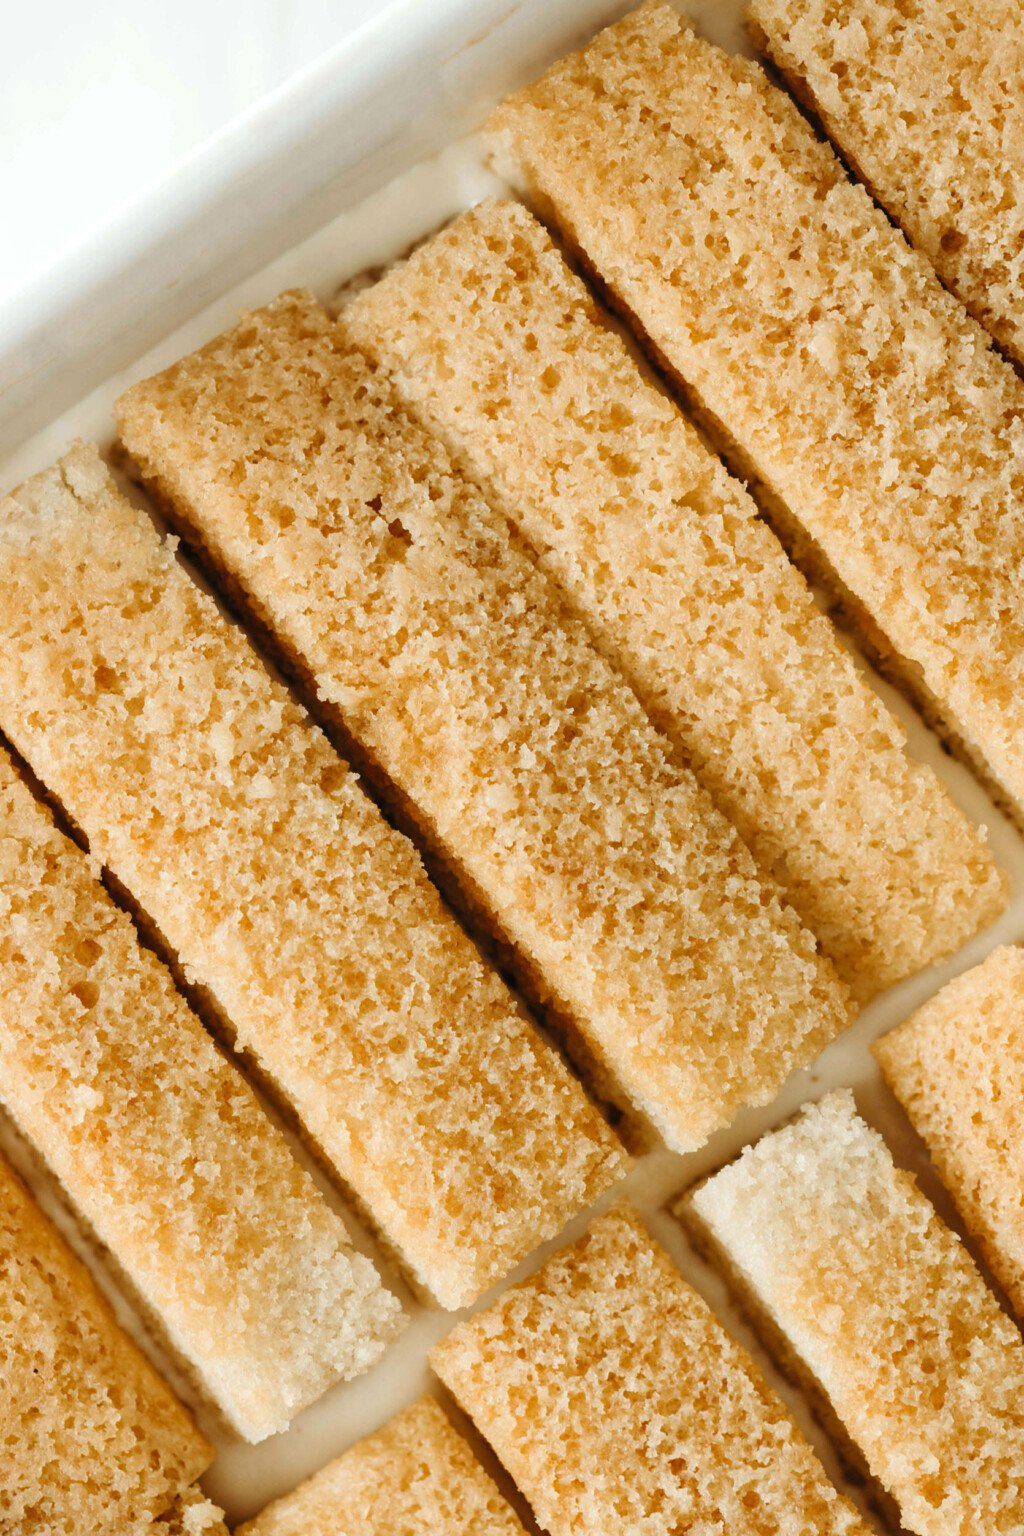 Slices of a vegan vanilla cake have been soaked in coffee.